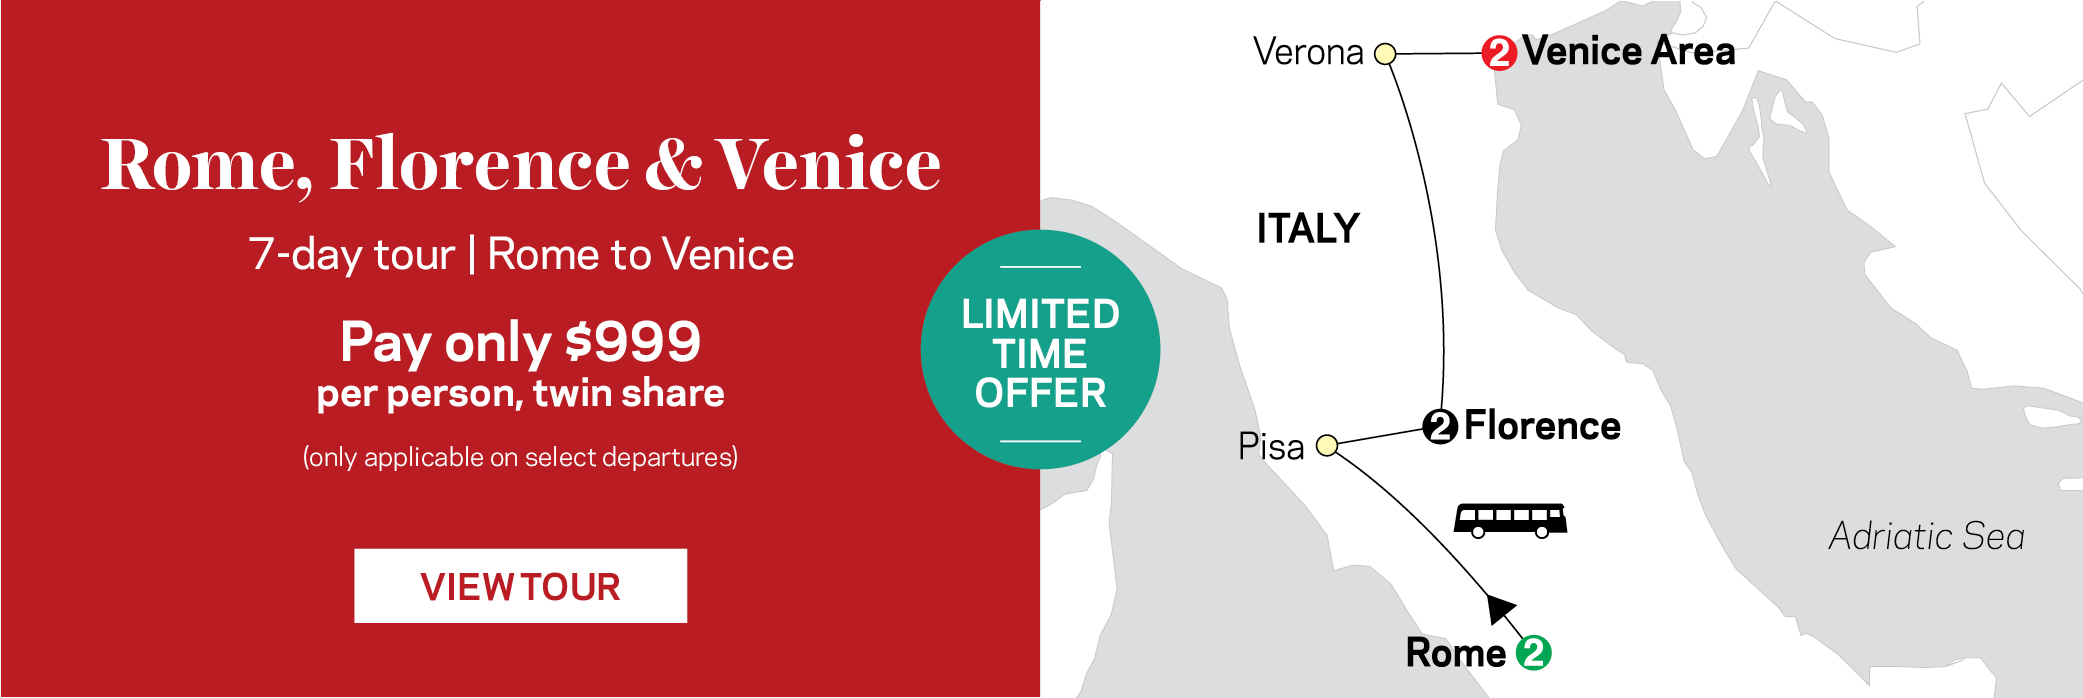 Rome, Florence & Venice Tour for $999 pp, twn